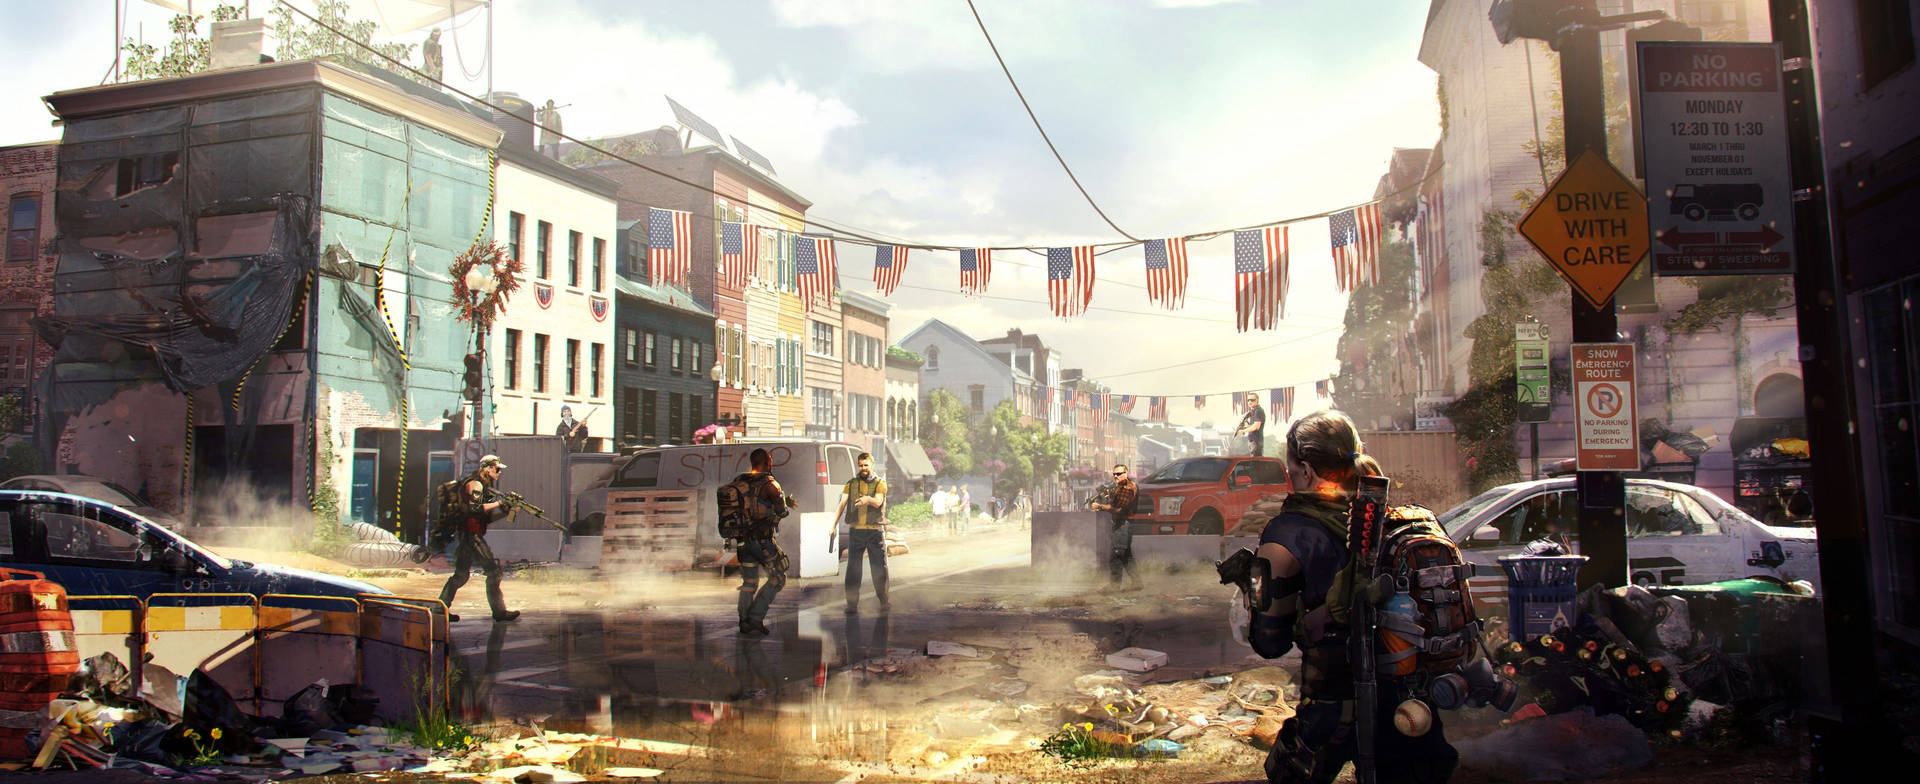 Exploration The Division 2 Background